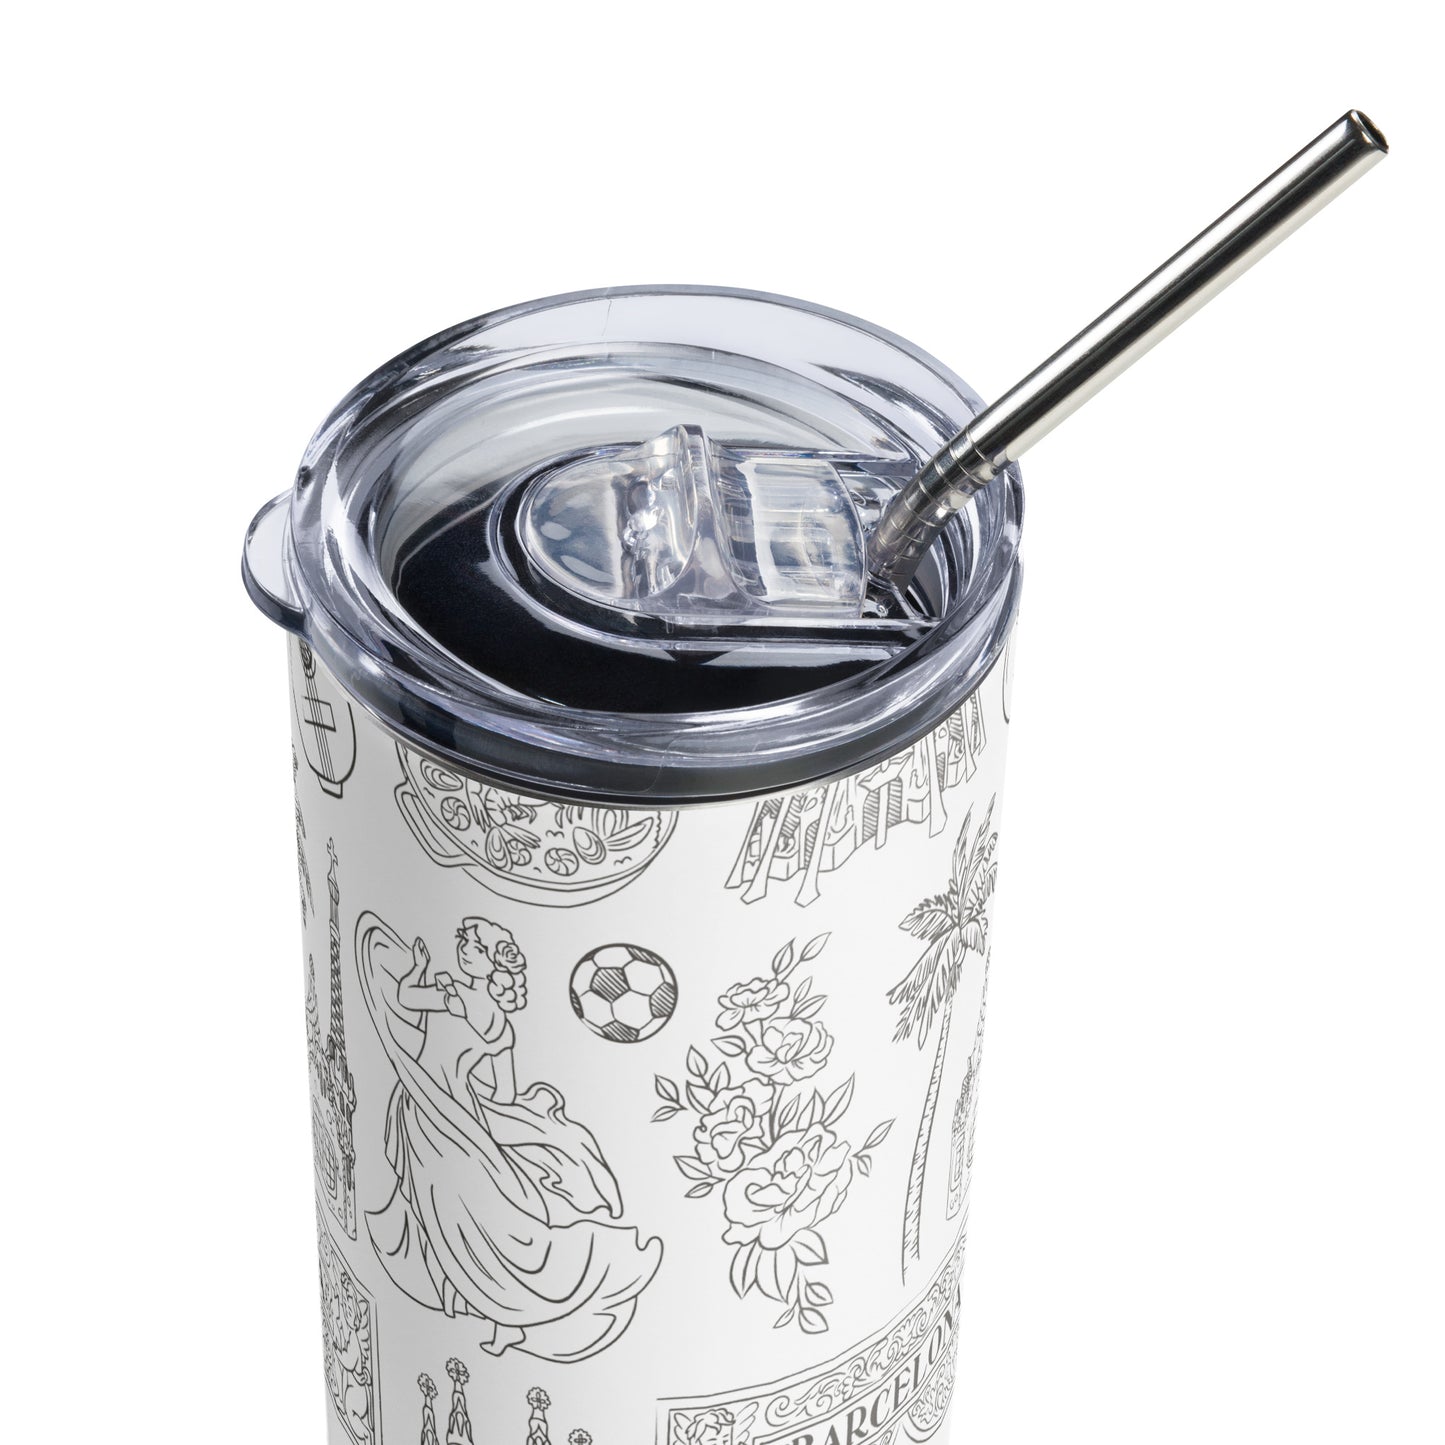 Barcelona Icons Stainless Steel Tumbler